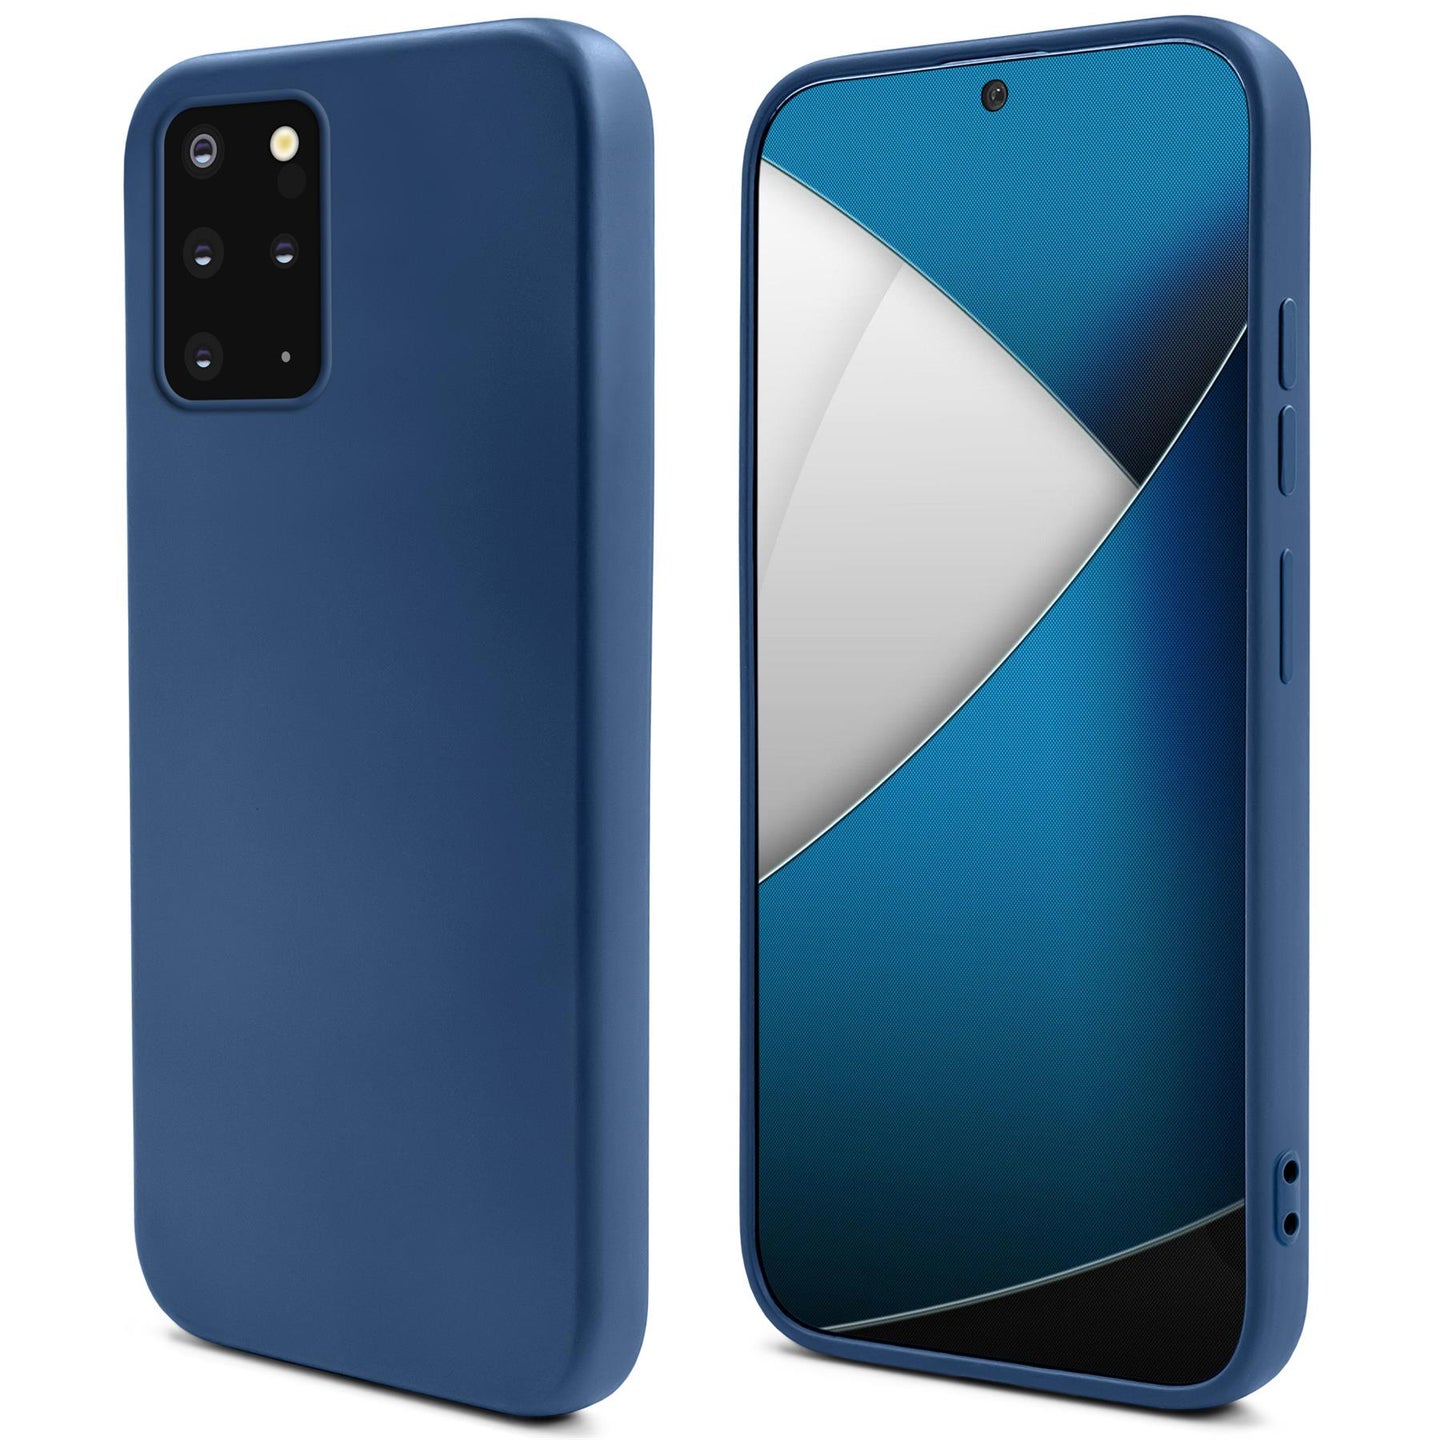 Moozy Lifestyle. Silicone Case for Samsung S20 Plus, Midnight Blue - Liquid Silicone Lightweight Cover with Matte Finish and Soft Microfiber Lining, Premium Silicone Case